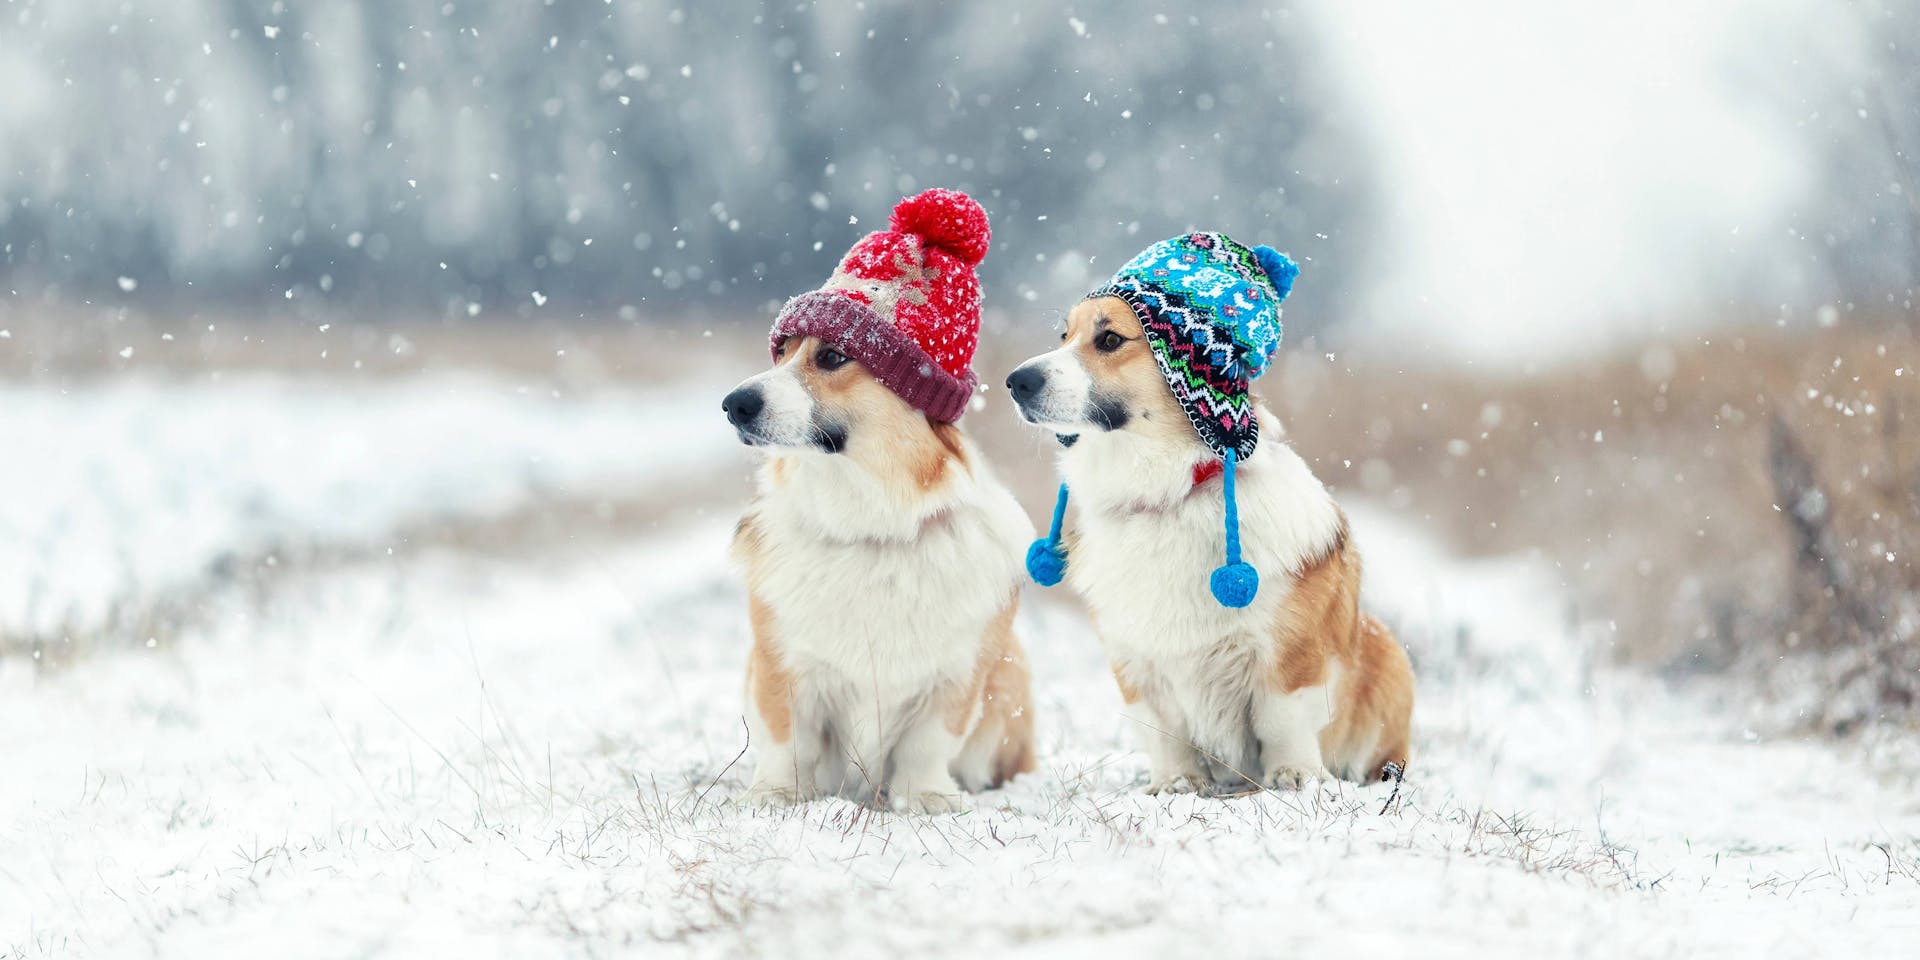 Two dogs in a winter setting sitting in snow wearing hats.